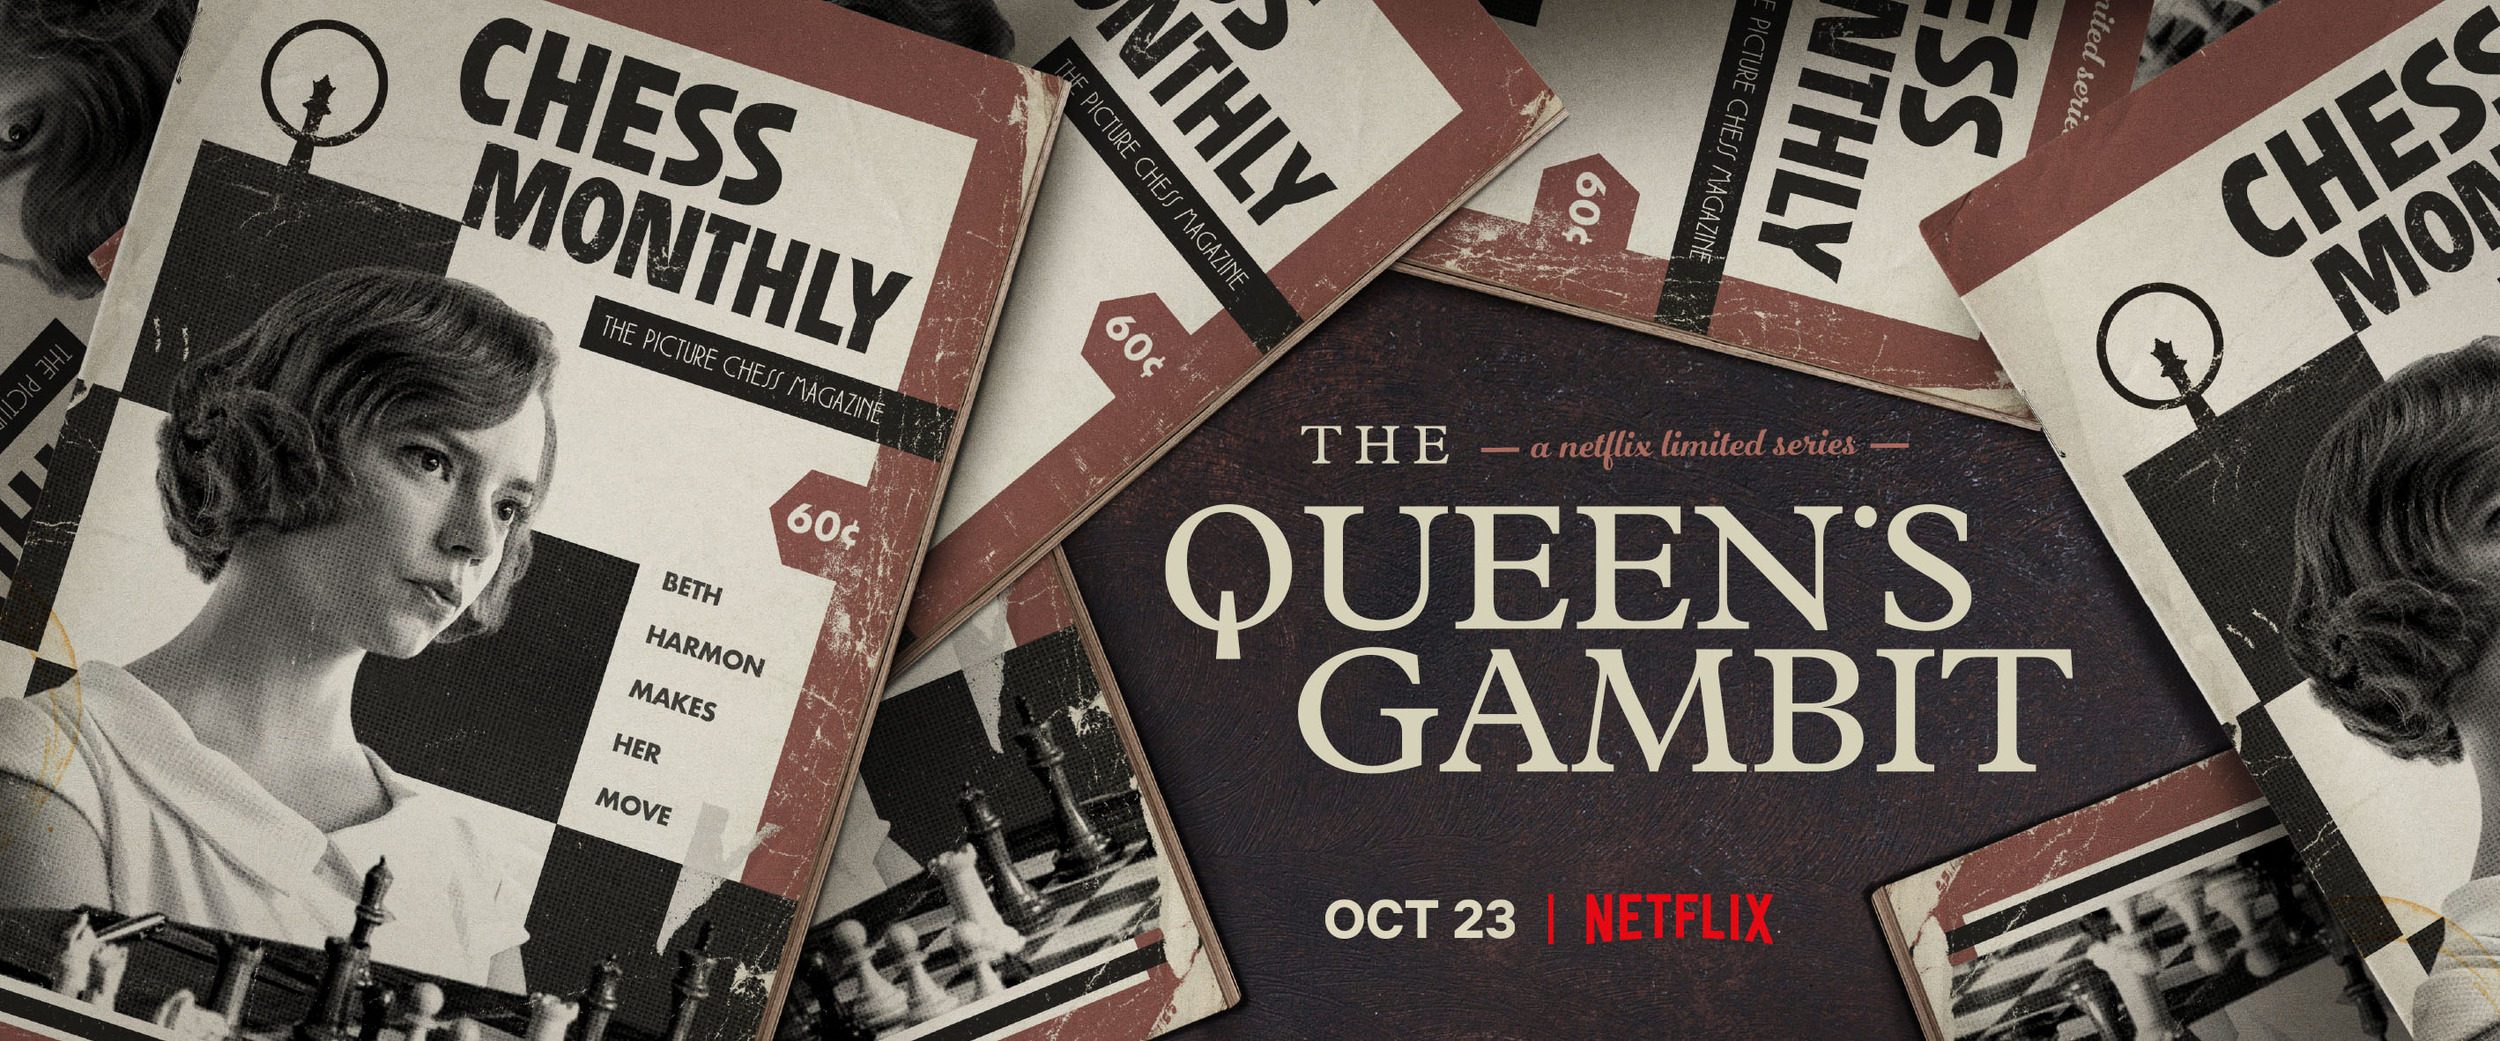 Mega Sized TV Poster Image for The Queen's Gambit (#7 of 7)